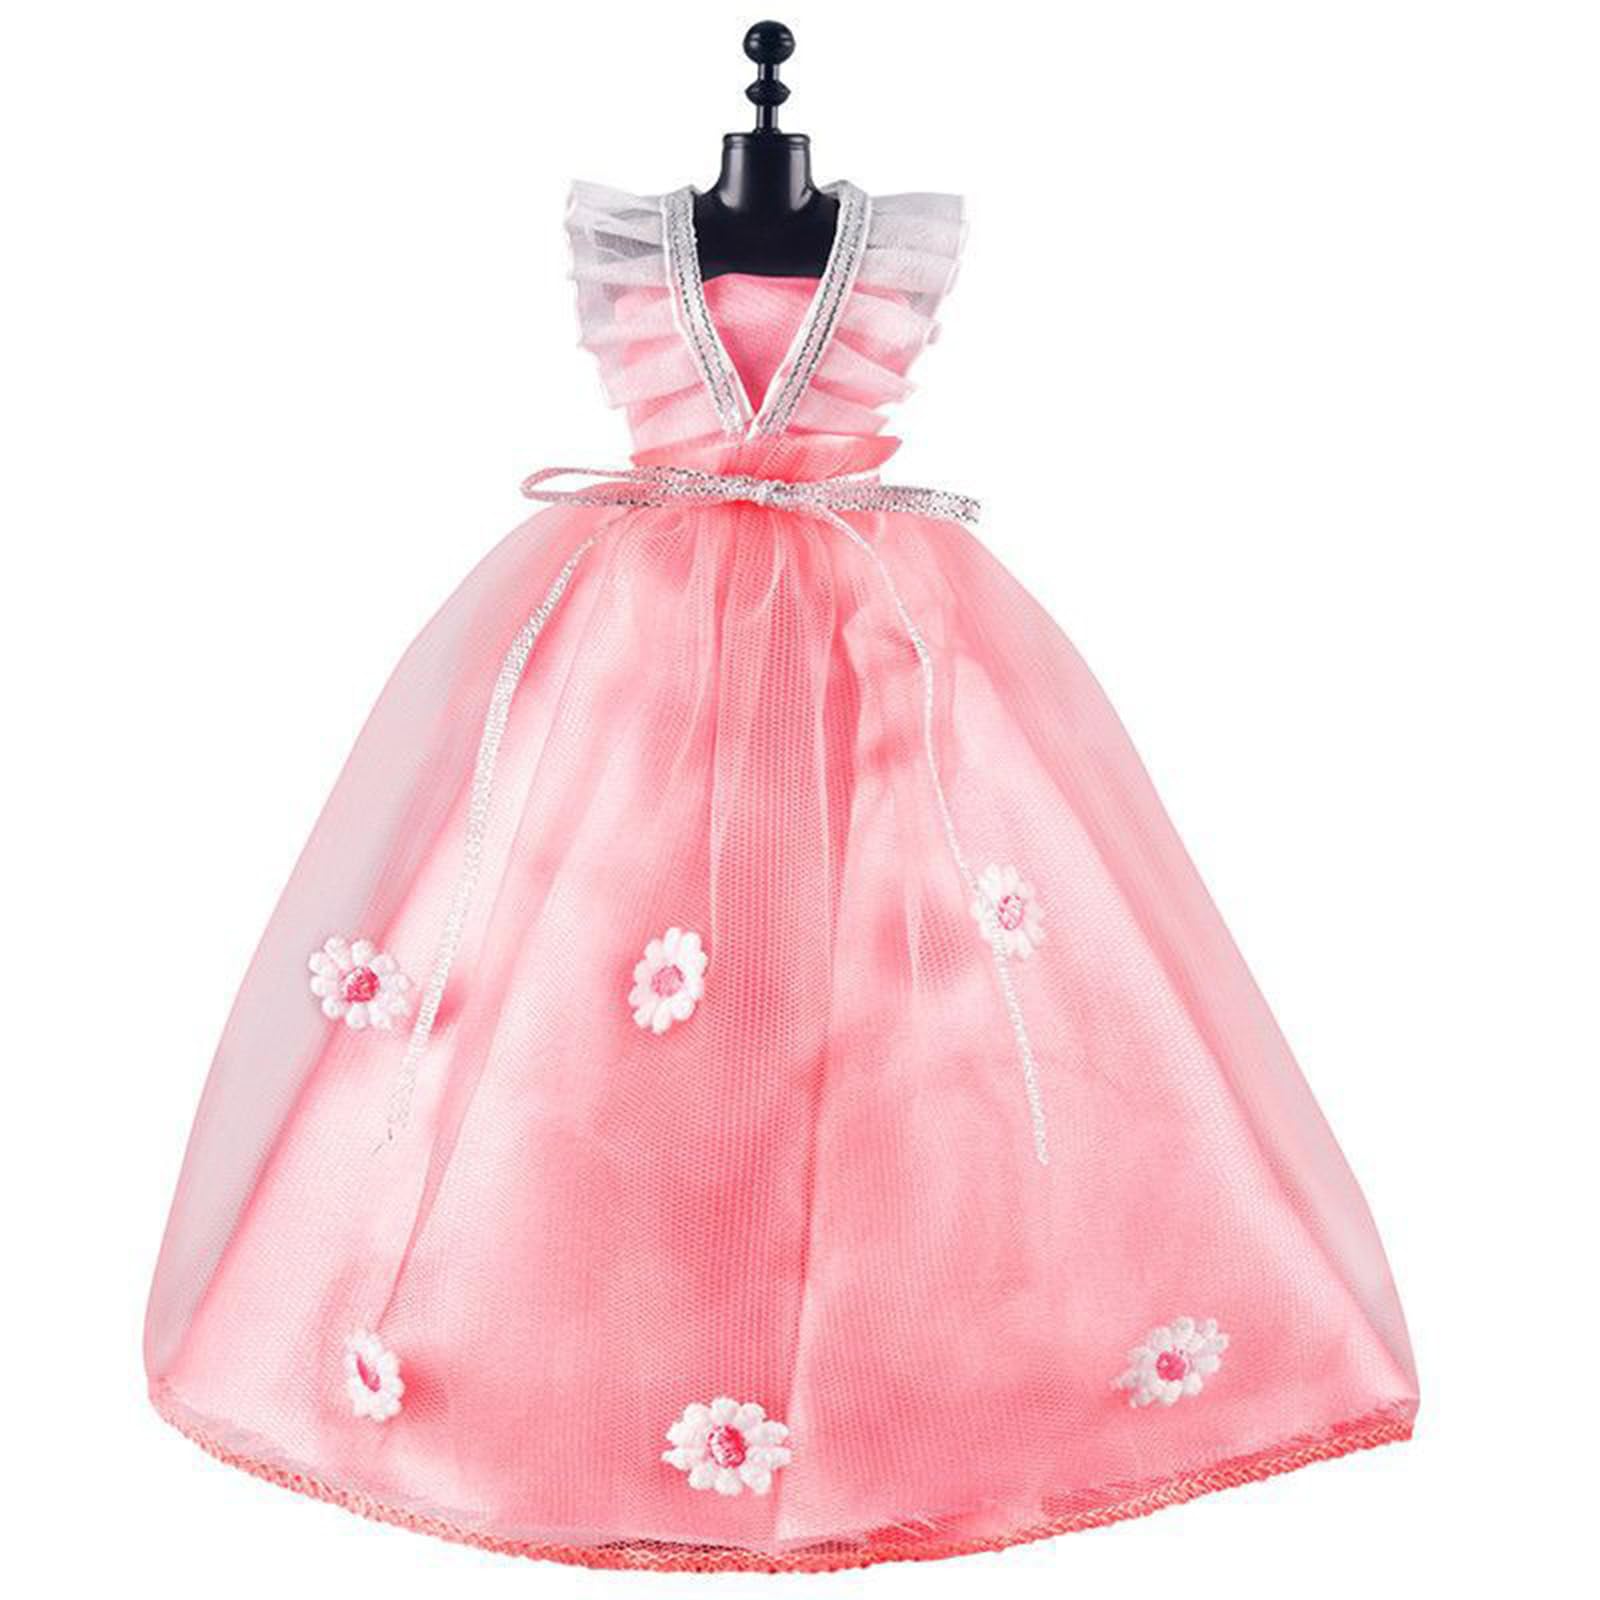 MENGZHIAO Doll Clothing Mannequin Display Stand, Plastic Doll Dress Stand Perfect Doll Display Stand Display Stand Doll Dress Stand Suitable for Doll Dresses and Wedding Dresses